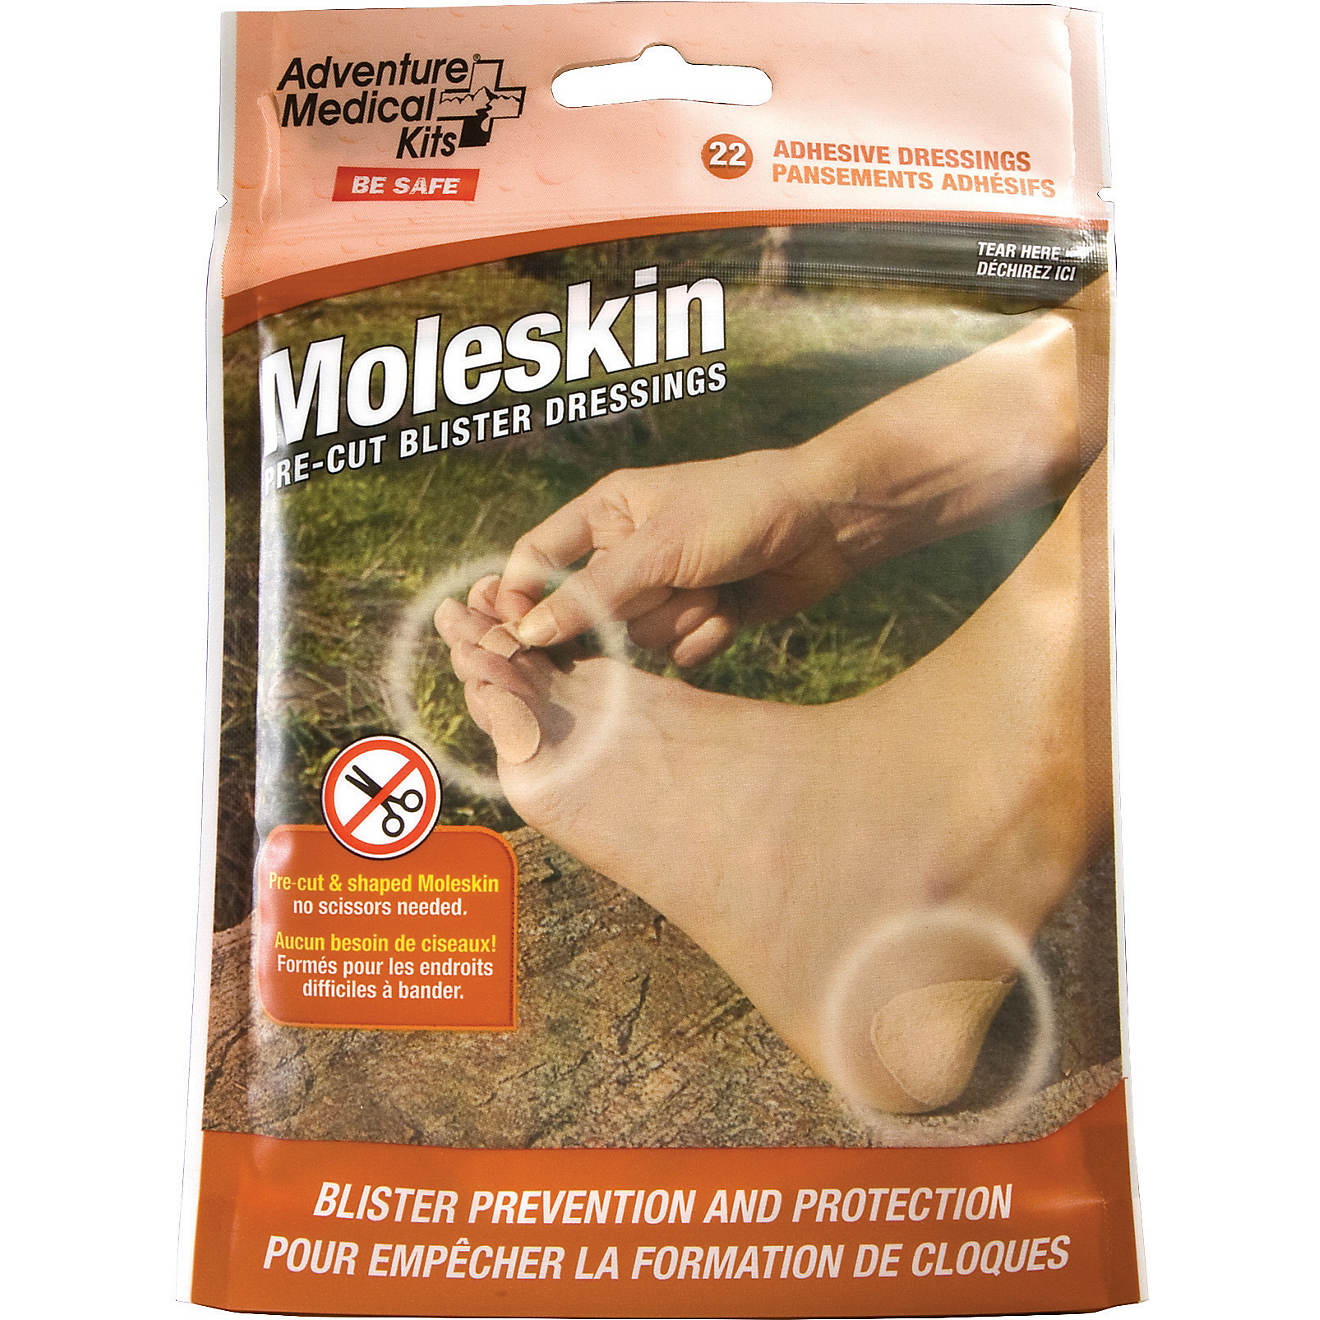 Moleskin for Blisters is great for Hiking & Sports! 